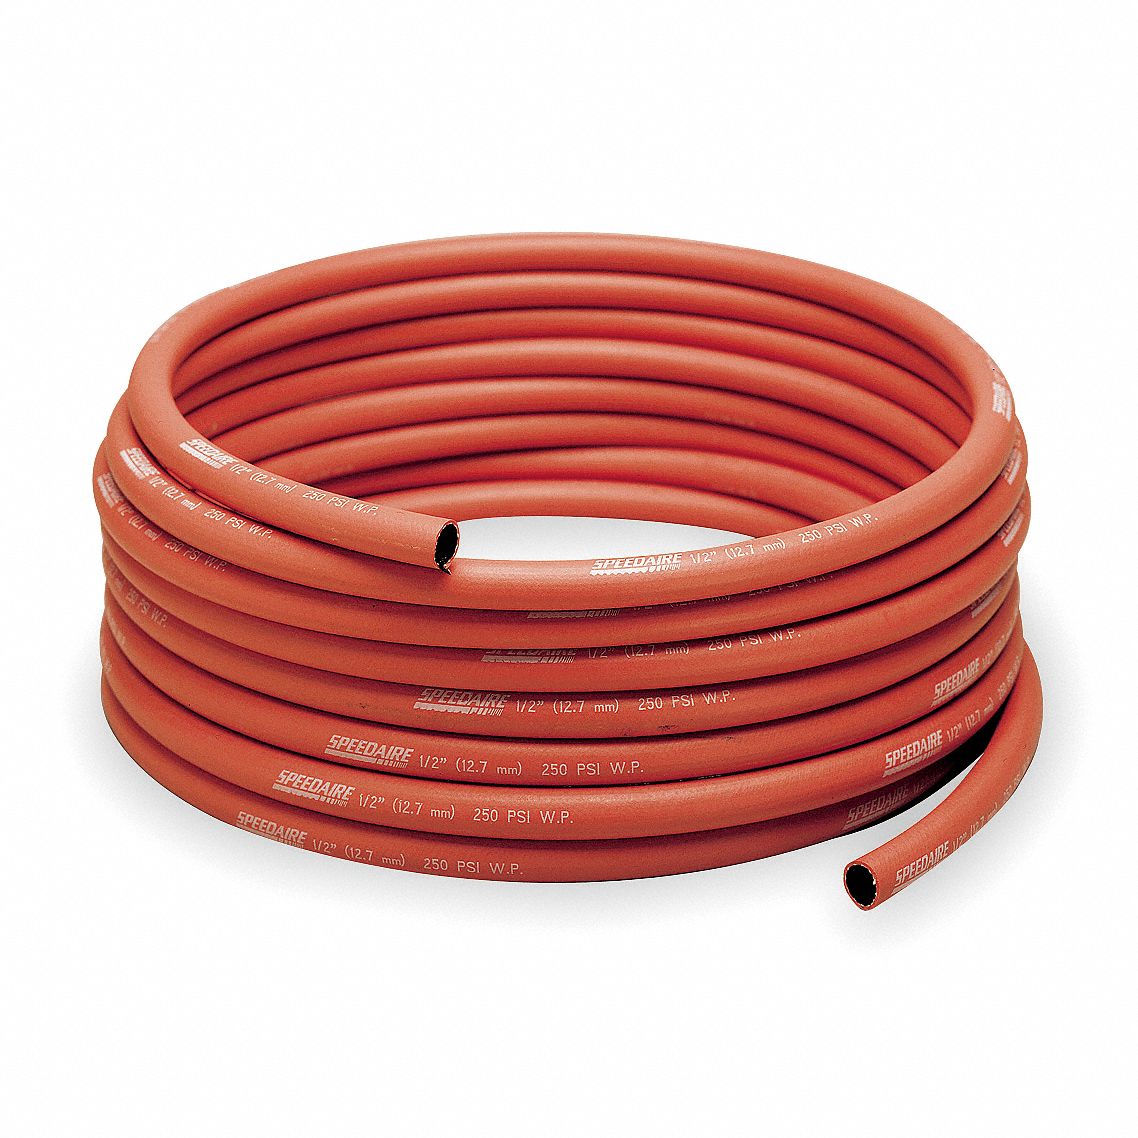 CSH Yllw/Red Air Hose Assembly 3/4" x 100' 300 psi w/Crow Foot & 3/4" M-NPT 